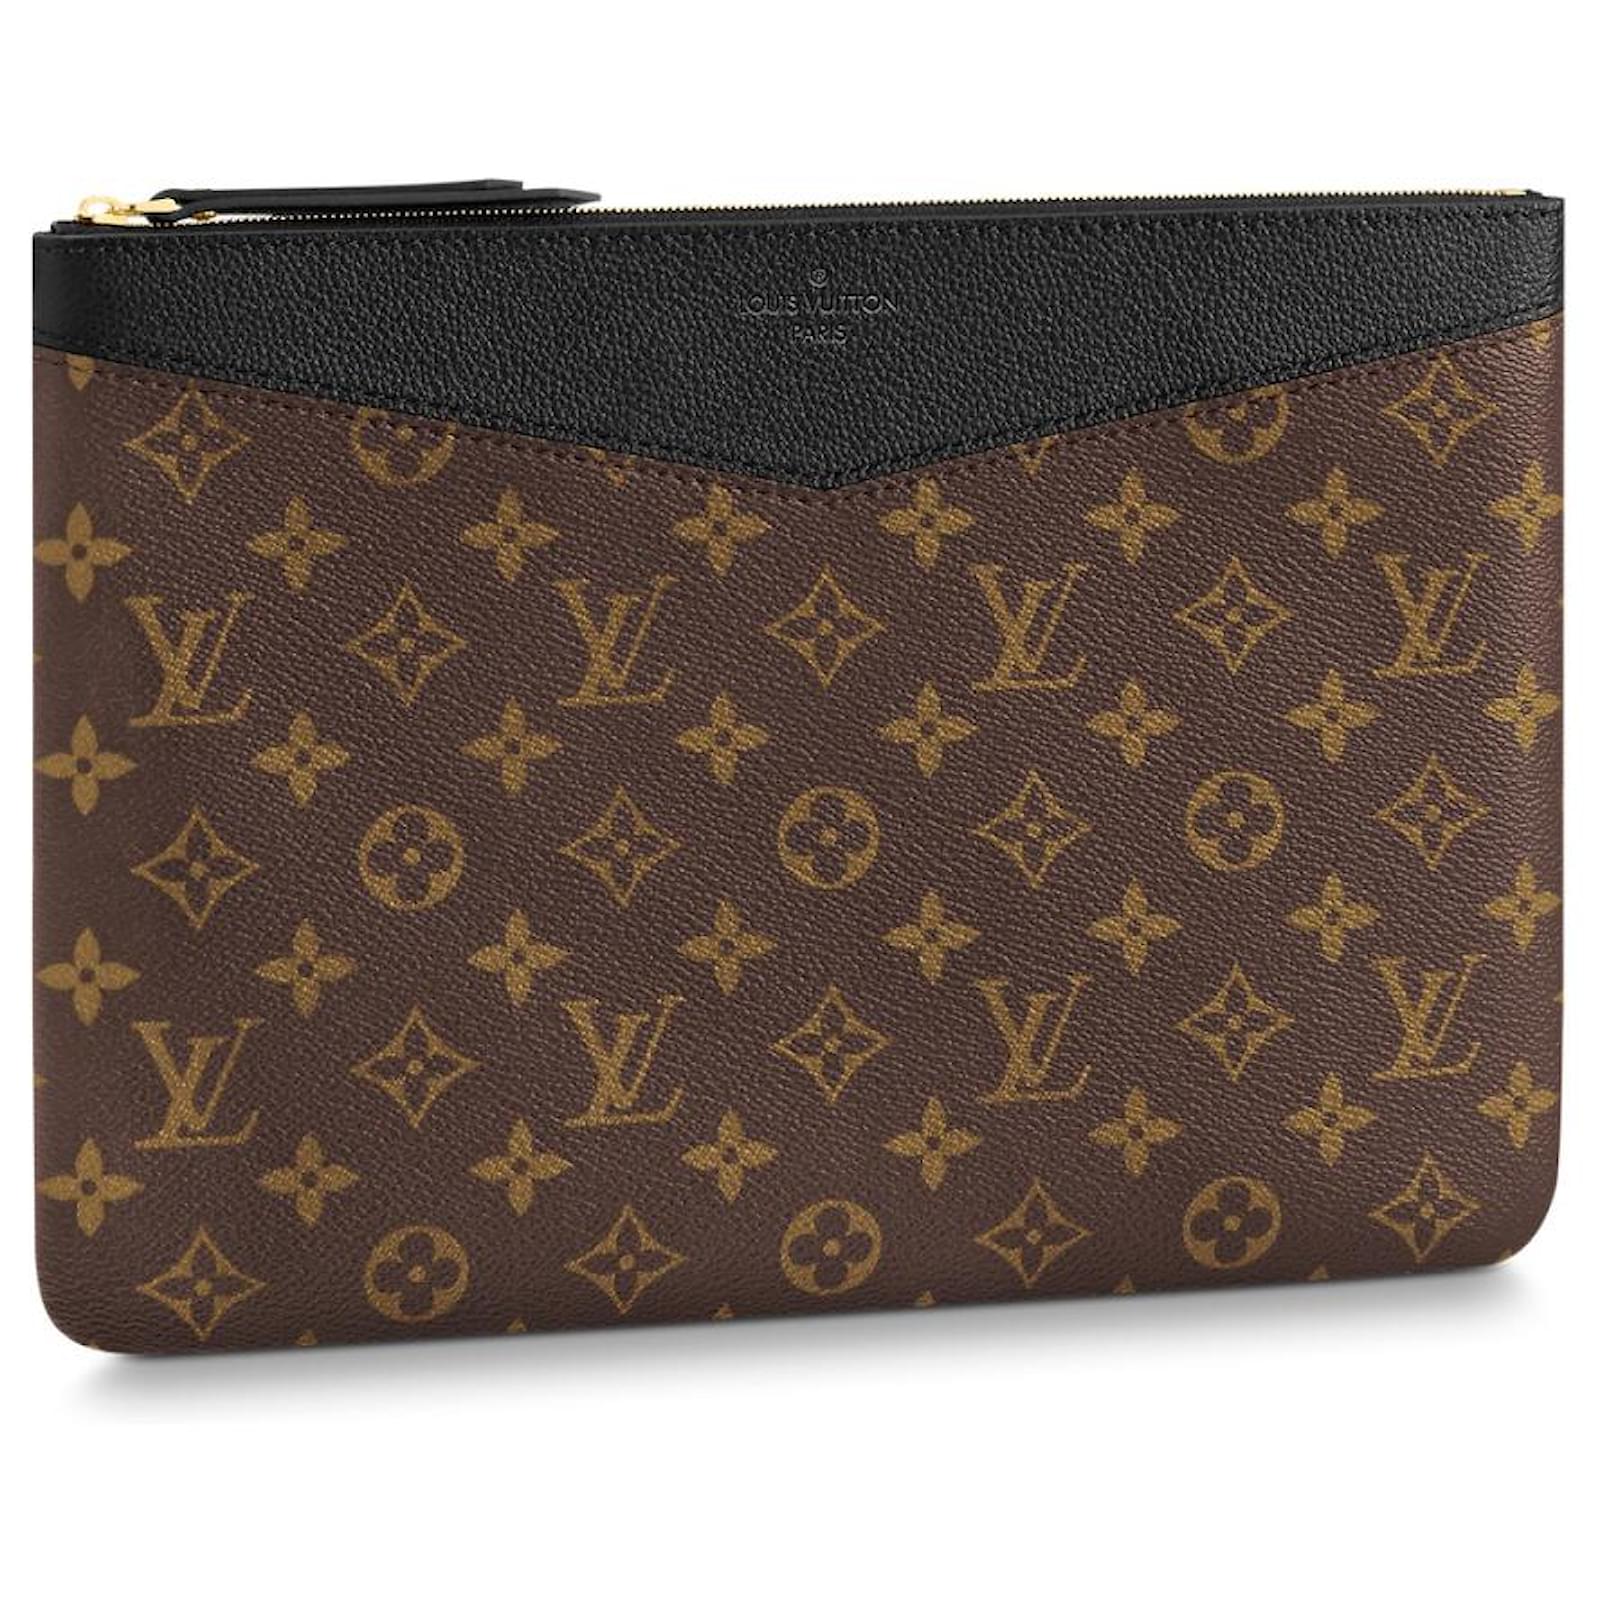 LOUIS VUITTON DAILY POUCH 2023, IS IT WORTH BUYING?